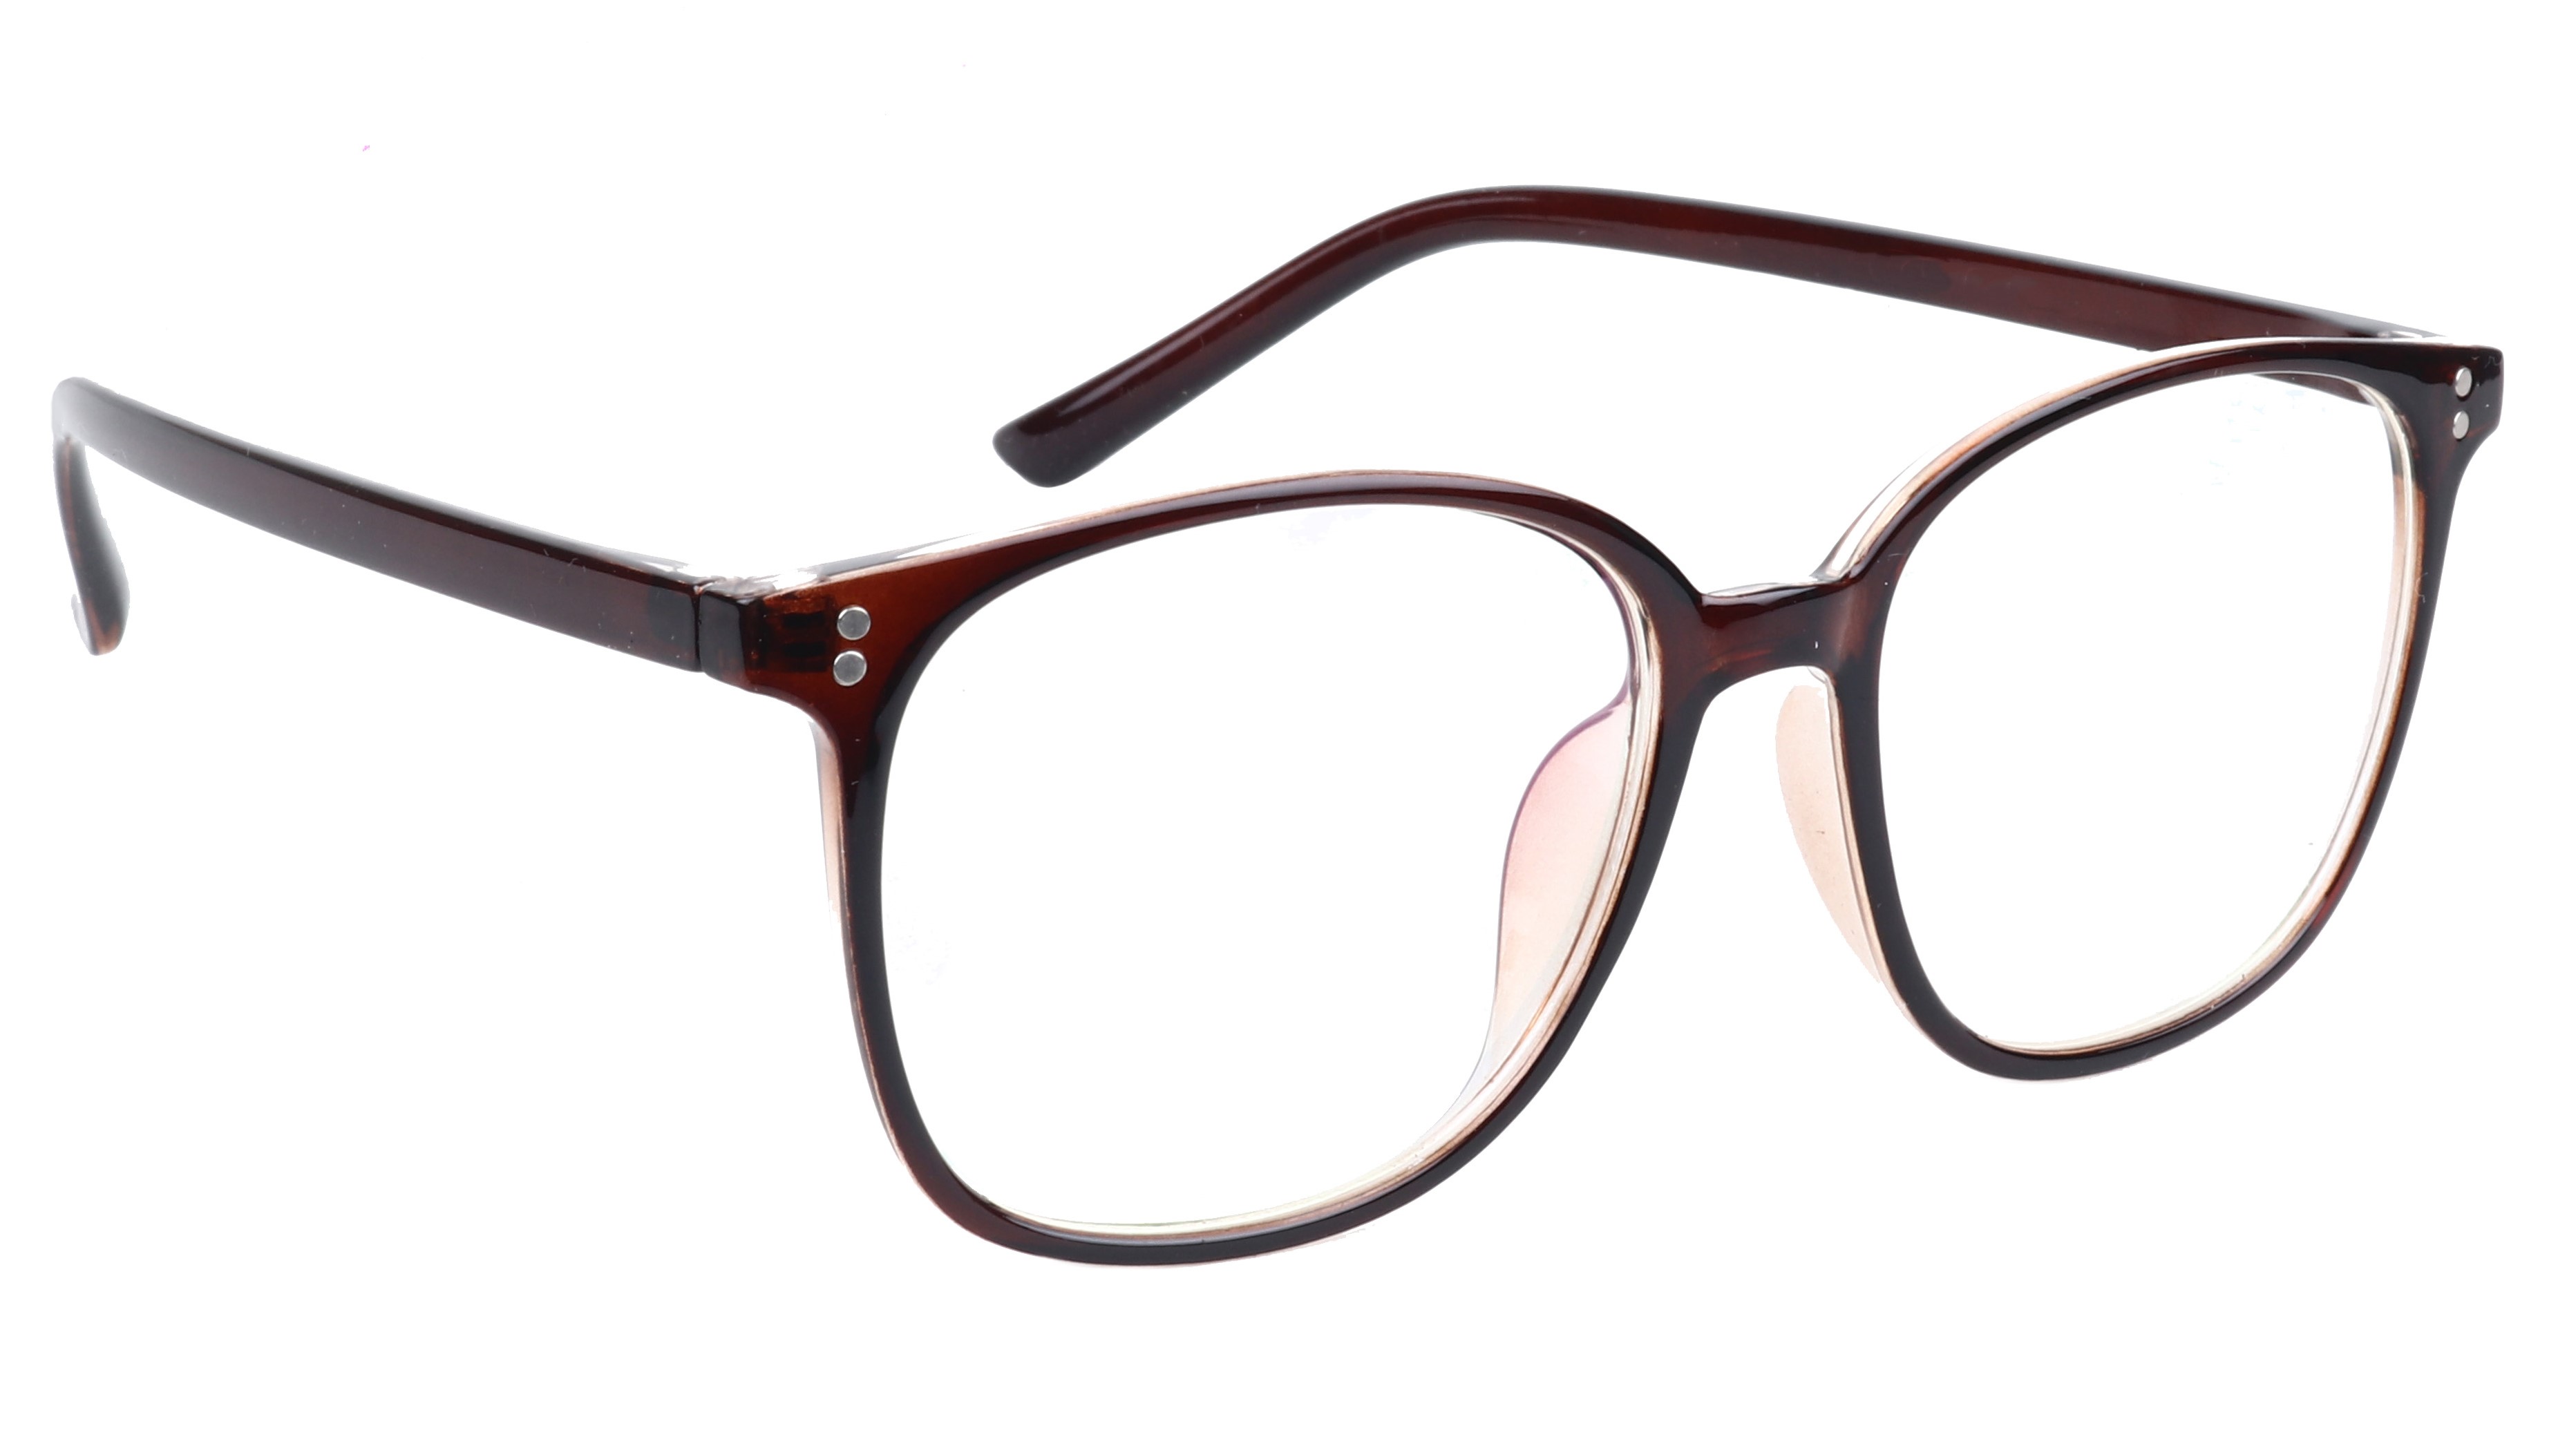 Unisex Oversized Square Spectacle Frame. Brown Color Frame.